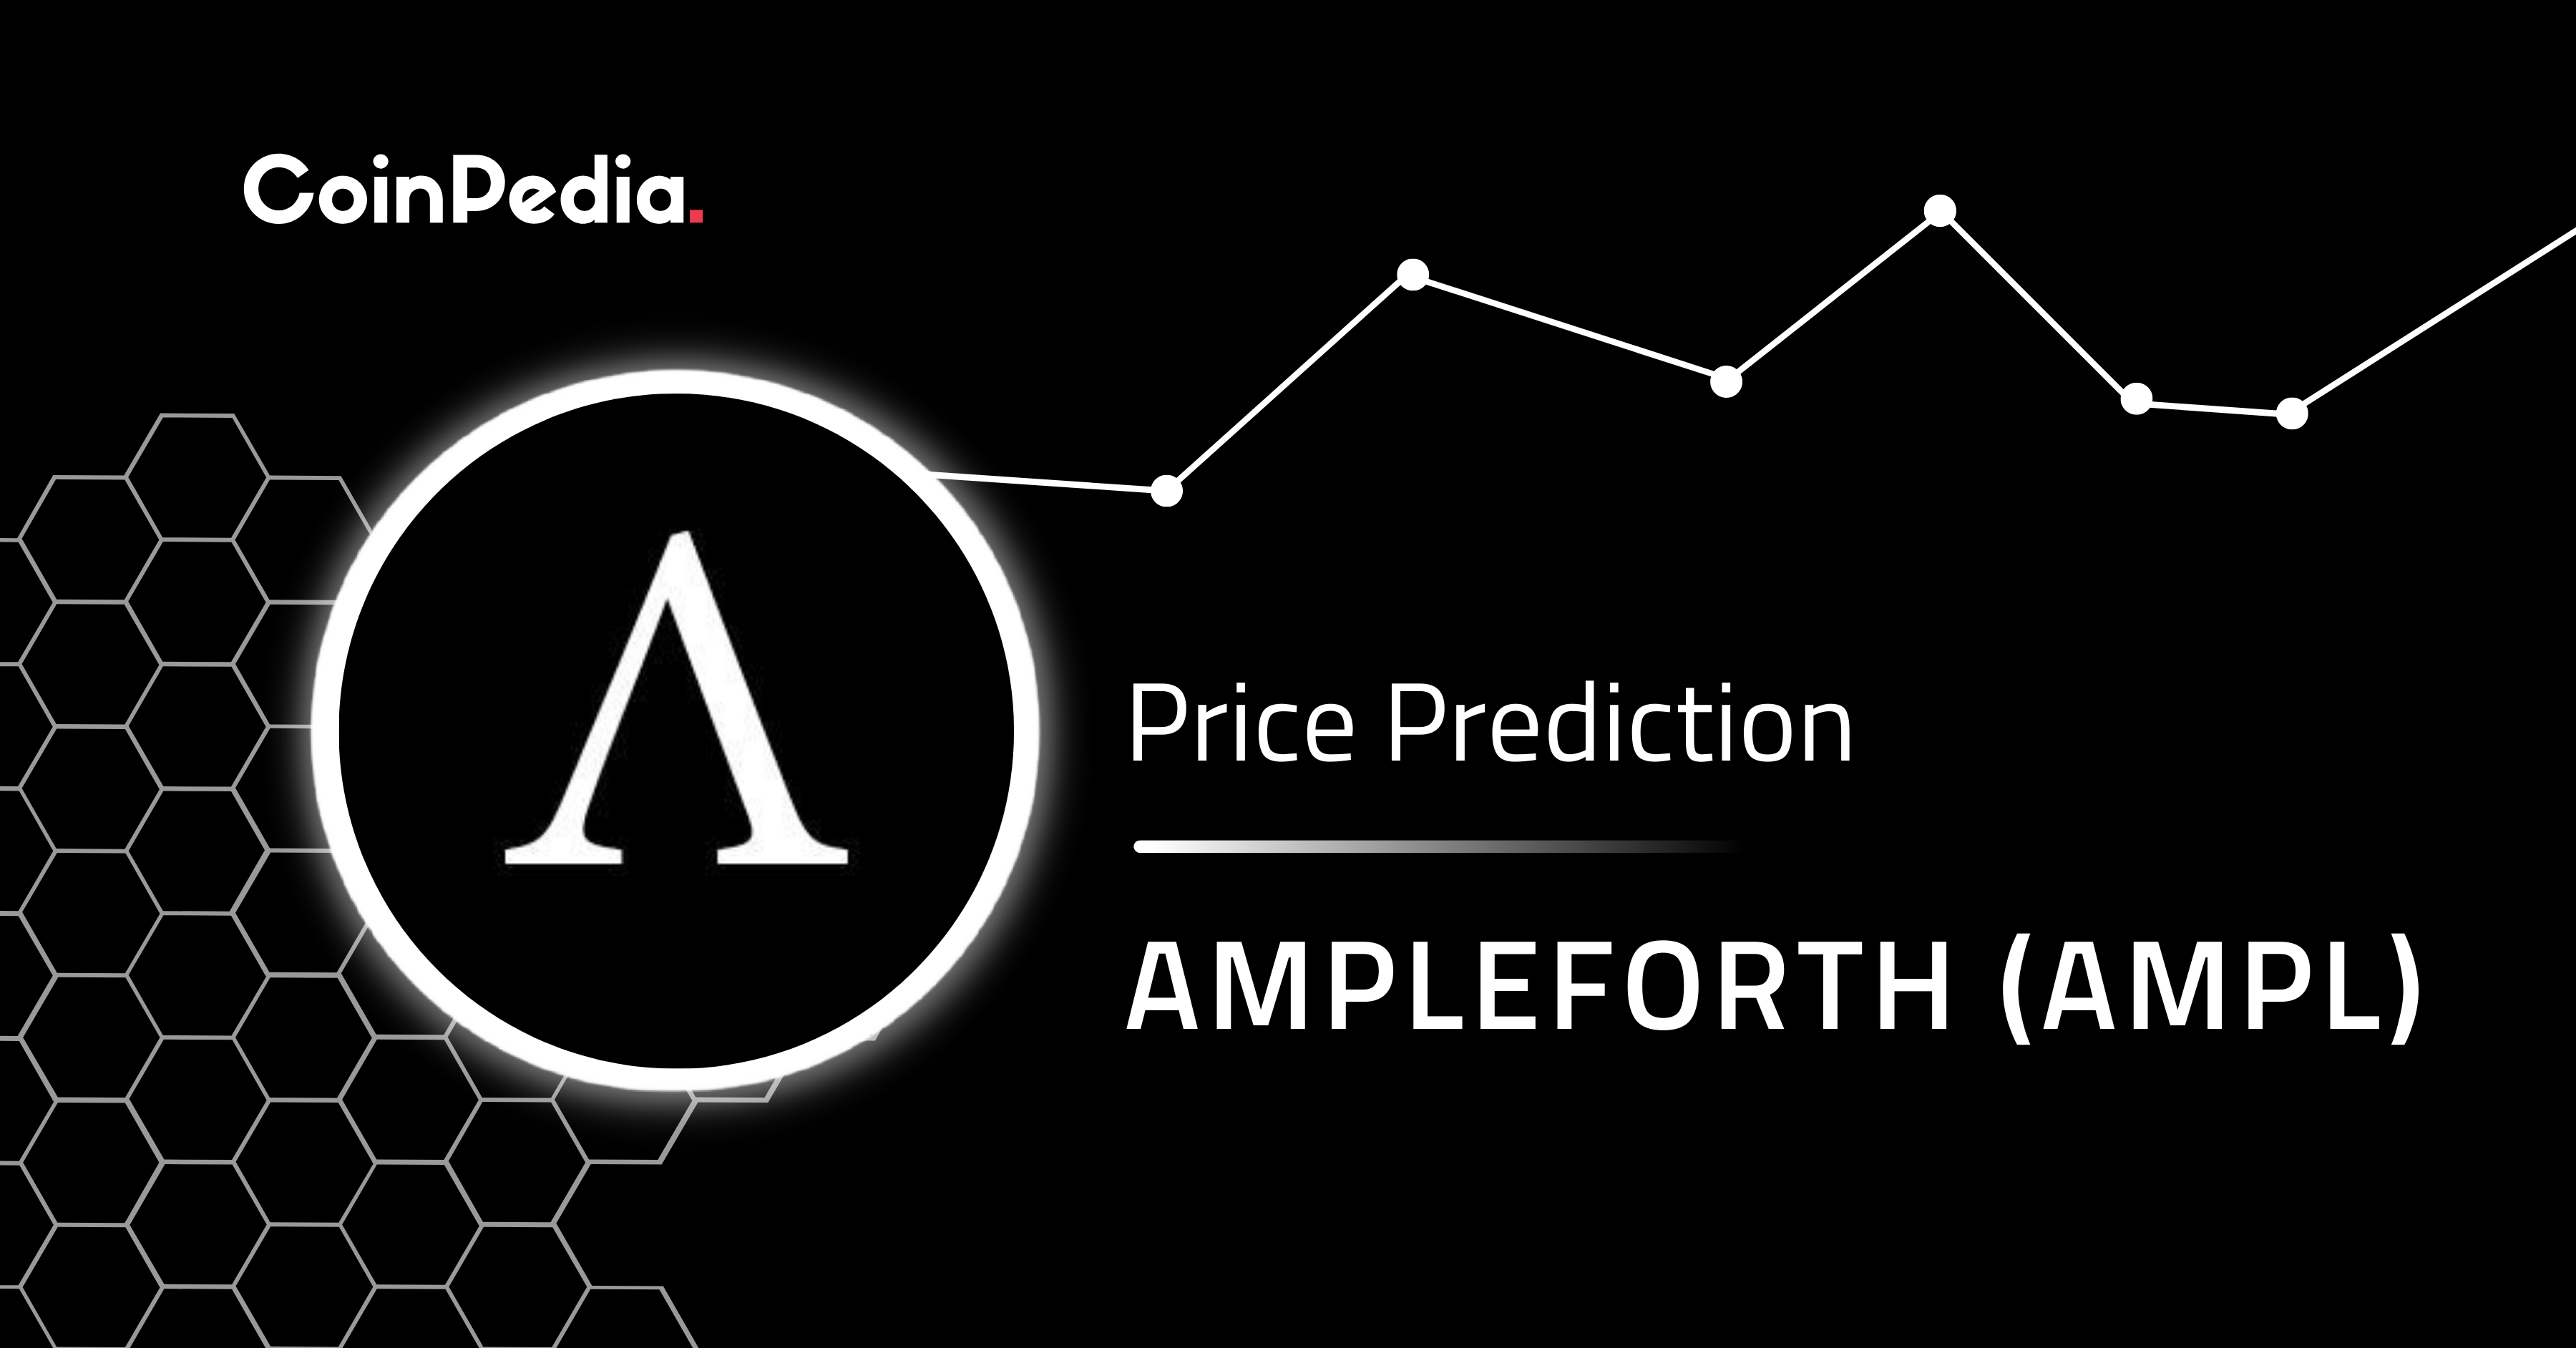 Ampleforth Price Prediction 2023, 2024, 2025: Will AMPL Price Reach $2 This Year?